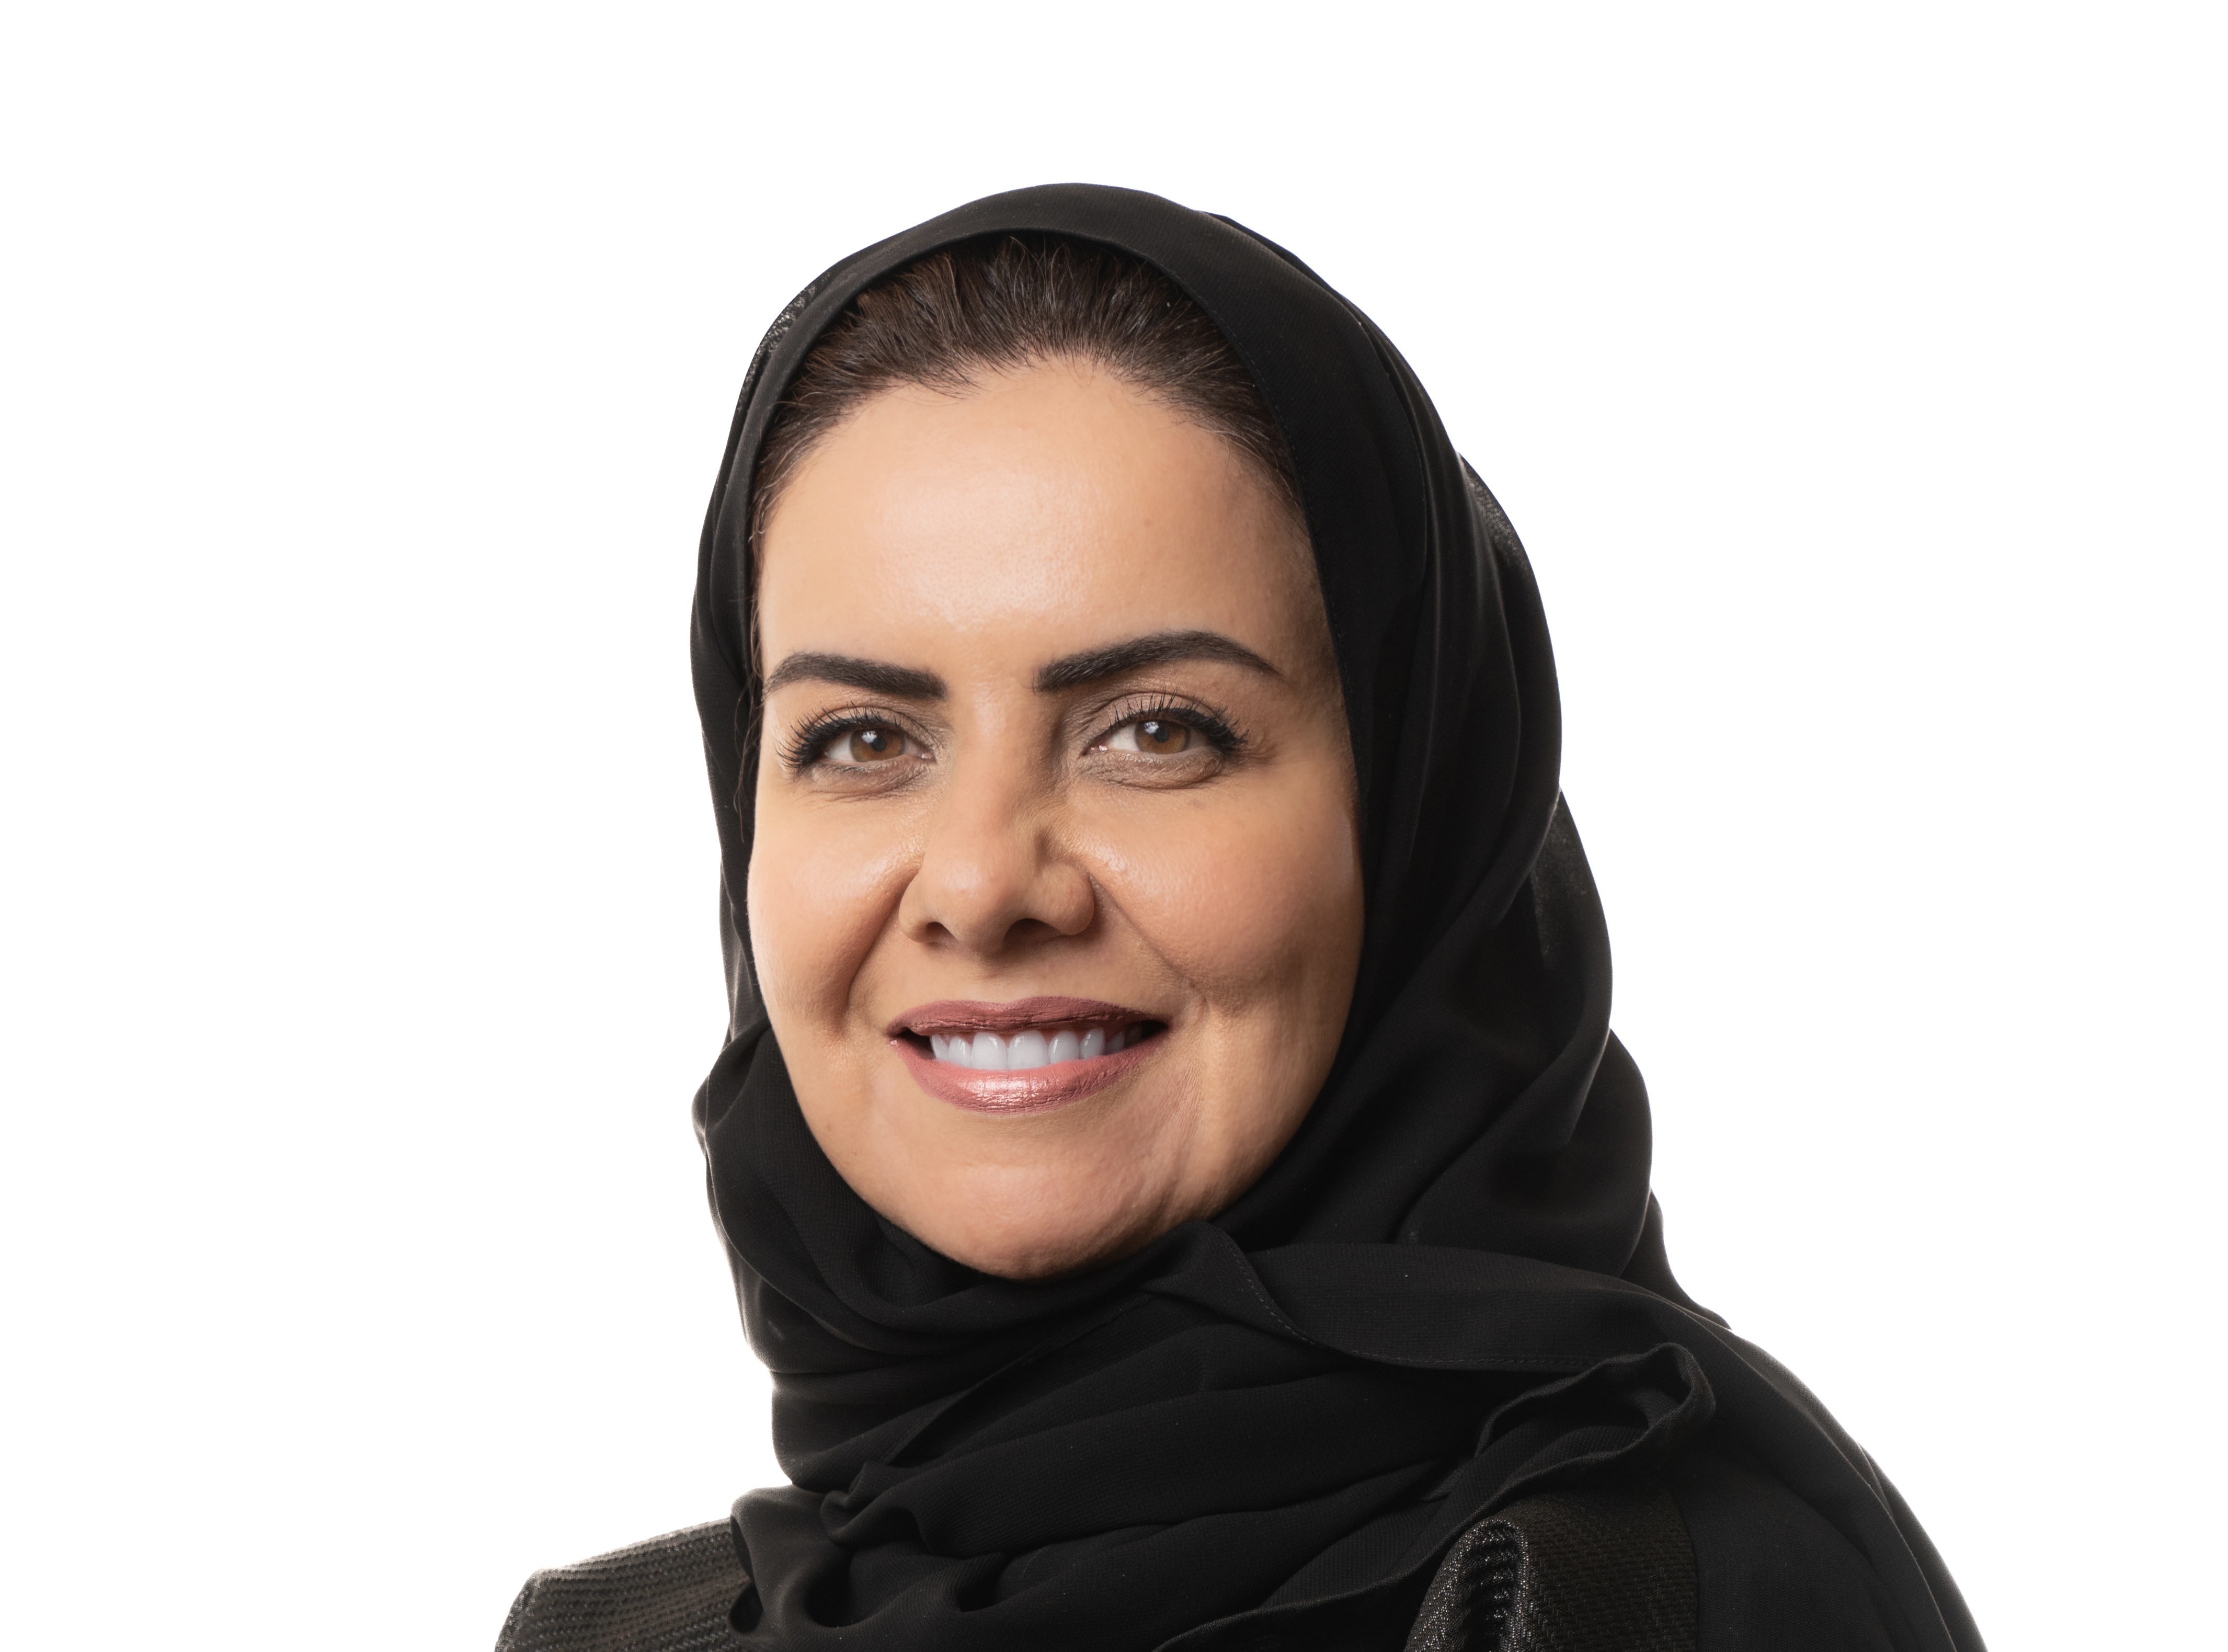 Her Excellency the President of the Human Rights Commission, Dr. Hala Al-Tuwaijri congratulates the wise leadership on the success of this year's Hajj and affirms that what has been achieved embodies the highest meanings of human care